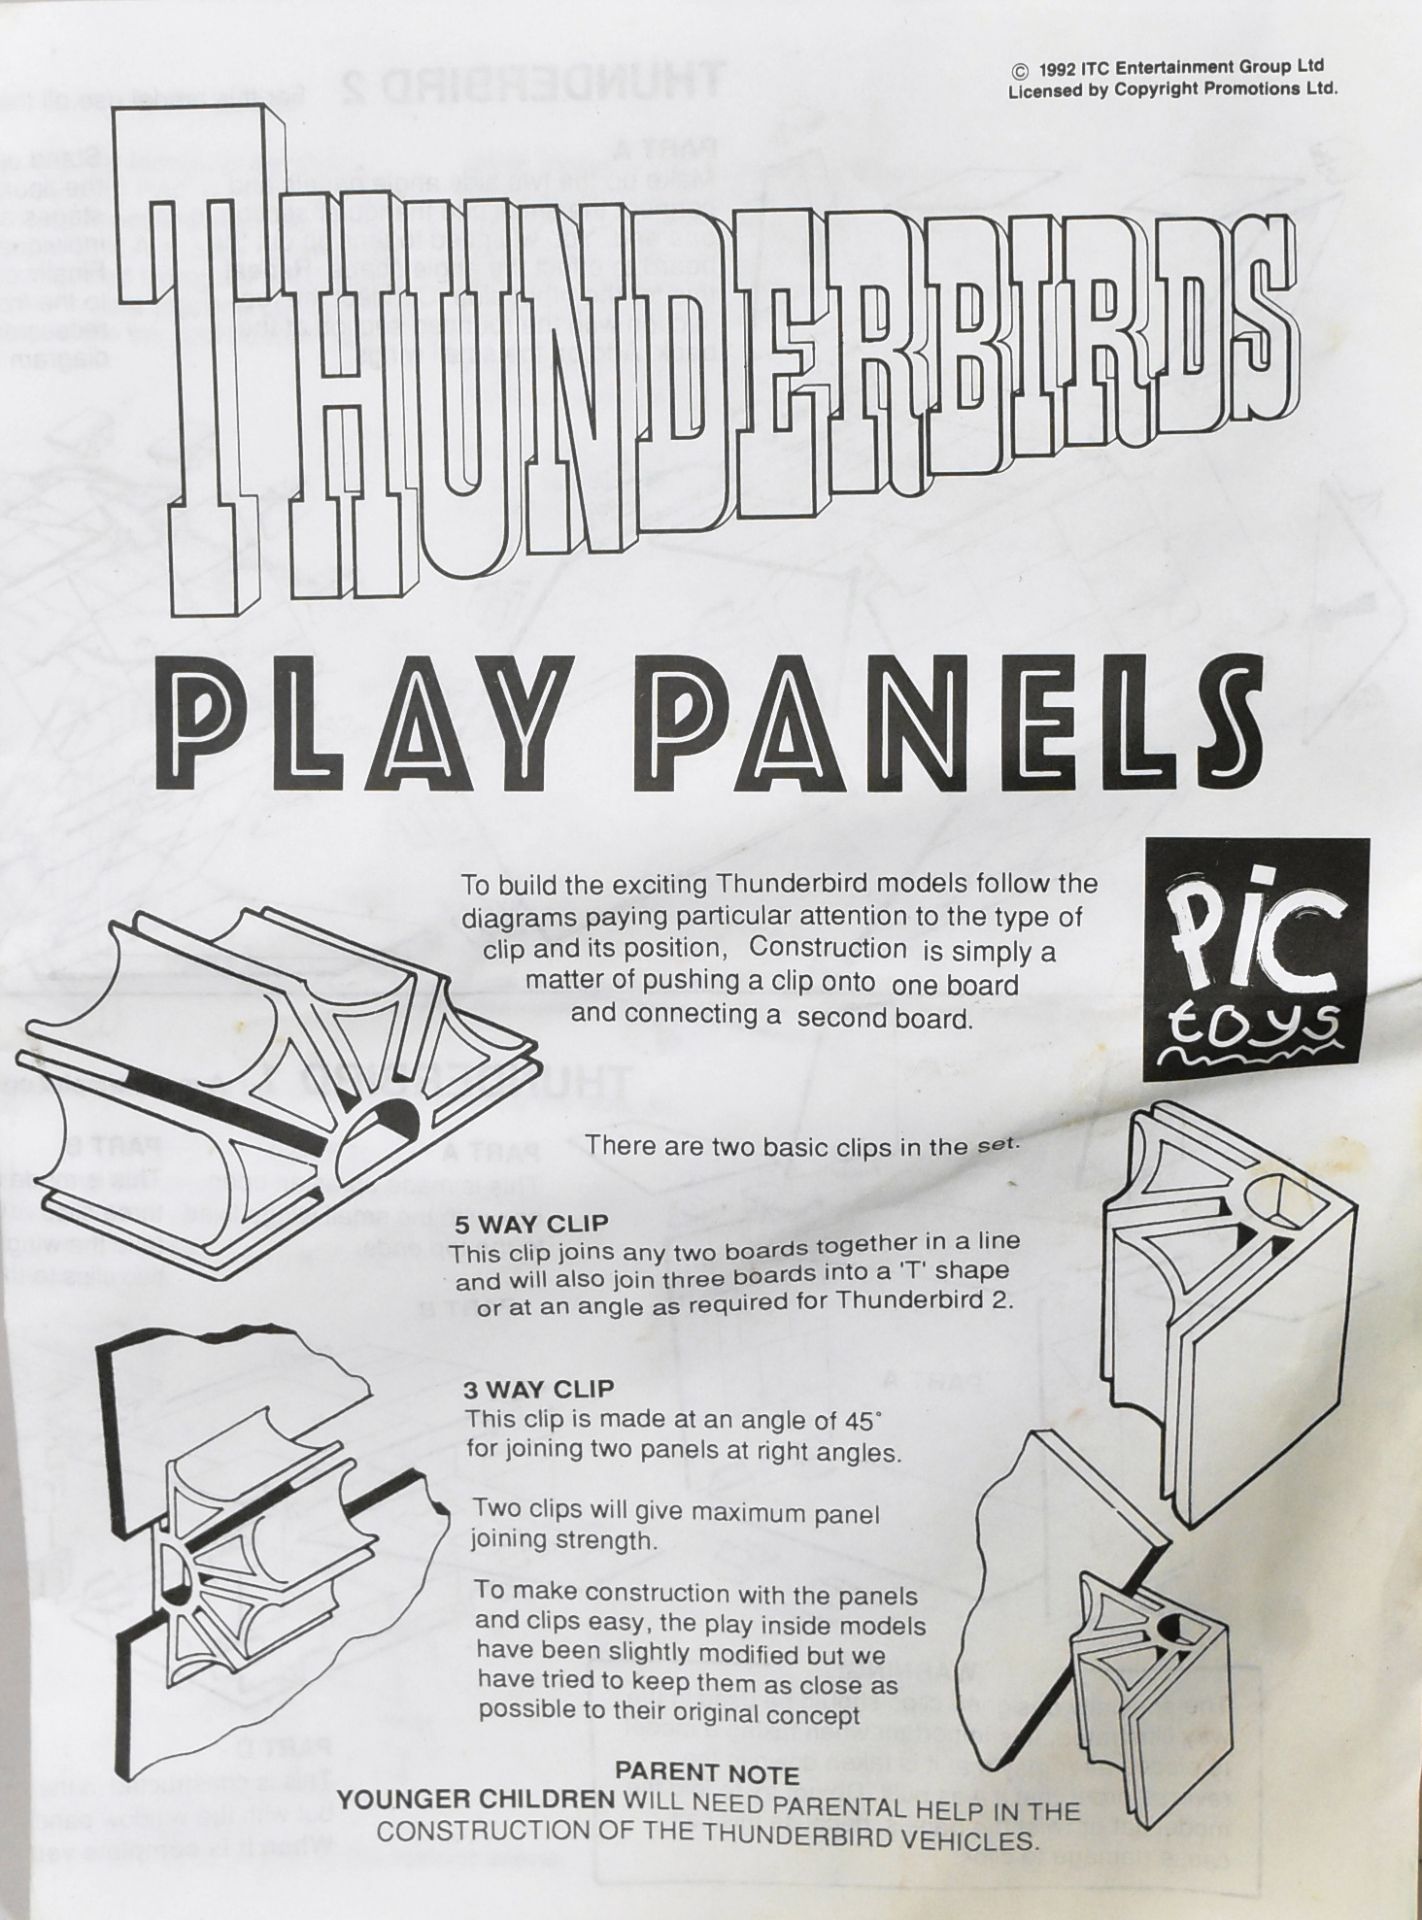 THUNDERBIRDS - VINTAGE PIC-TOYS MADE 'PLAY PANELS' PLAYSET - Image 7 of 7